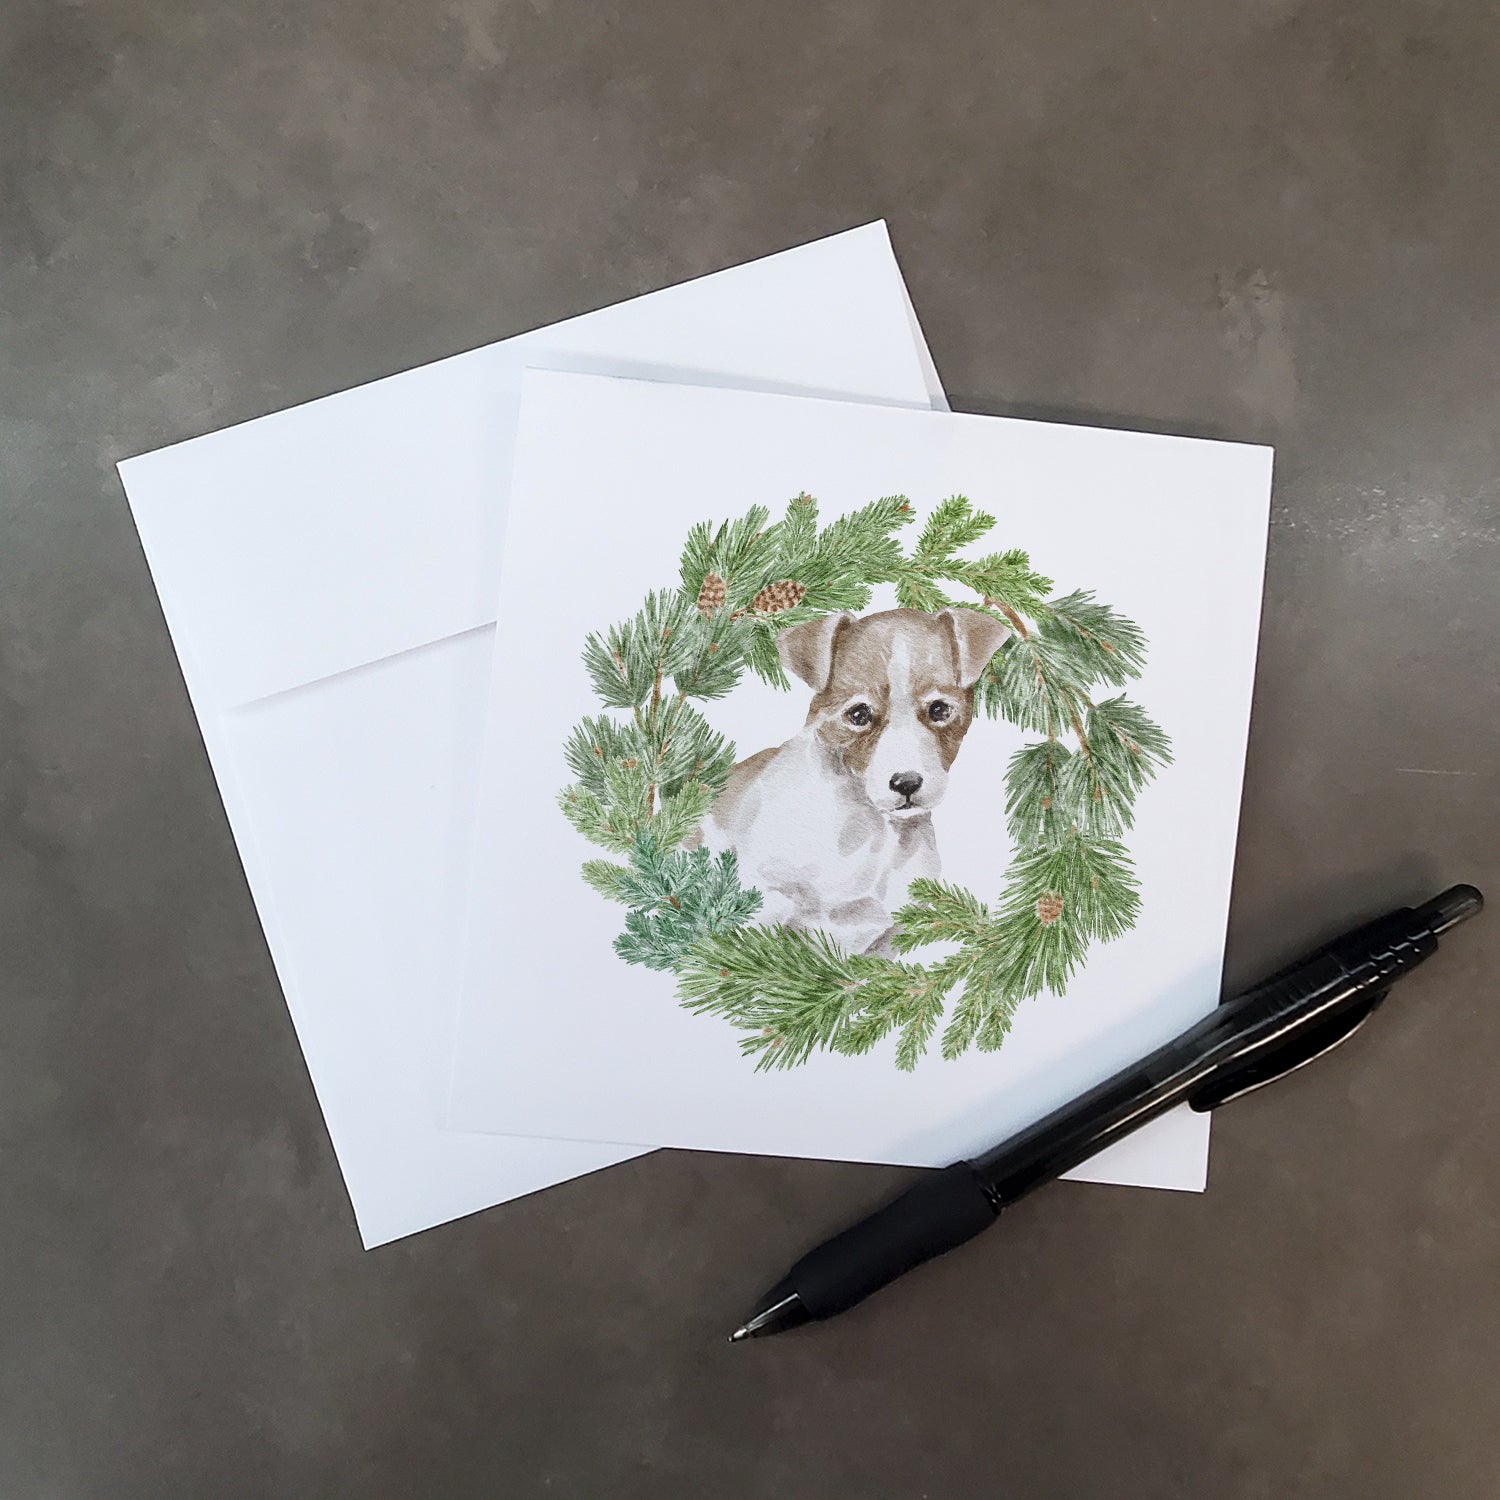 Jack Russell Terrier Puppy Chestnut and White with Christmas Wreath Square Greeting Cards and Envelopes Pack of 8 - the-store.com